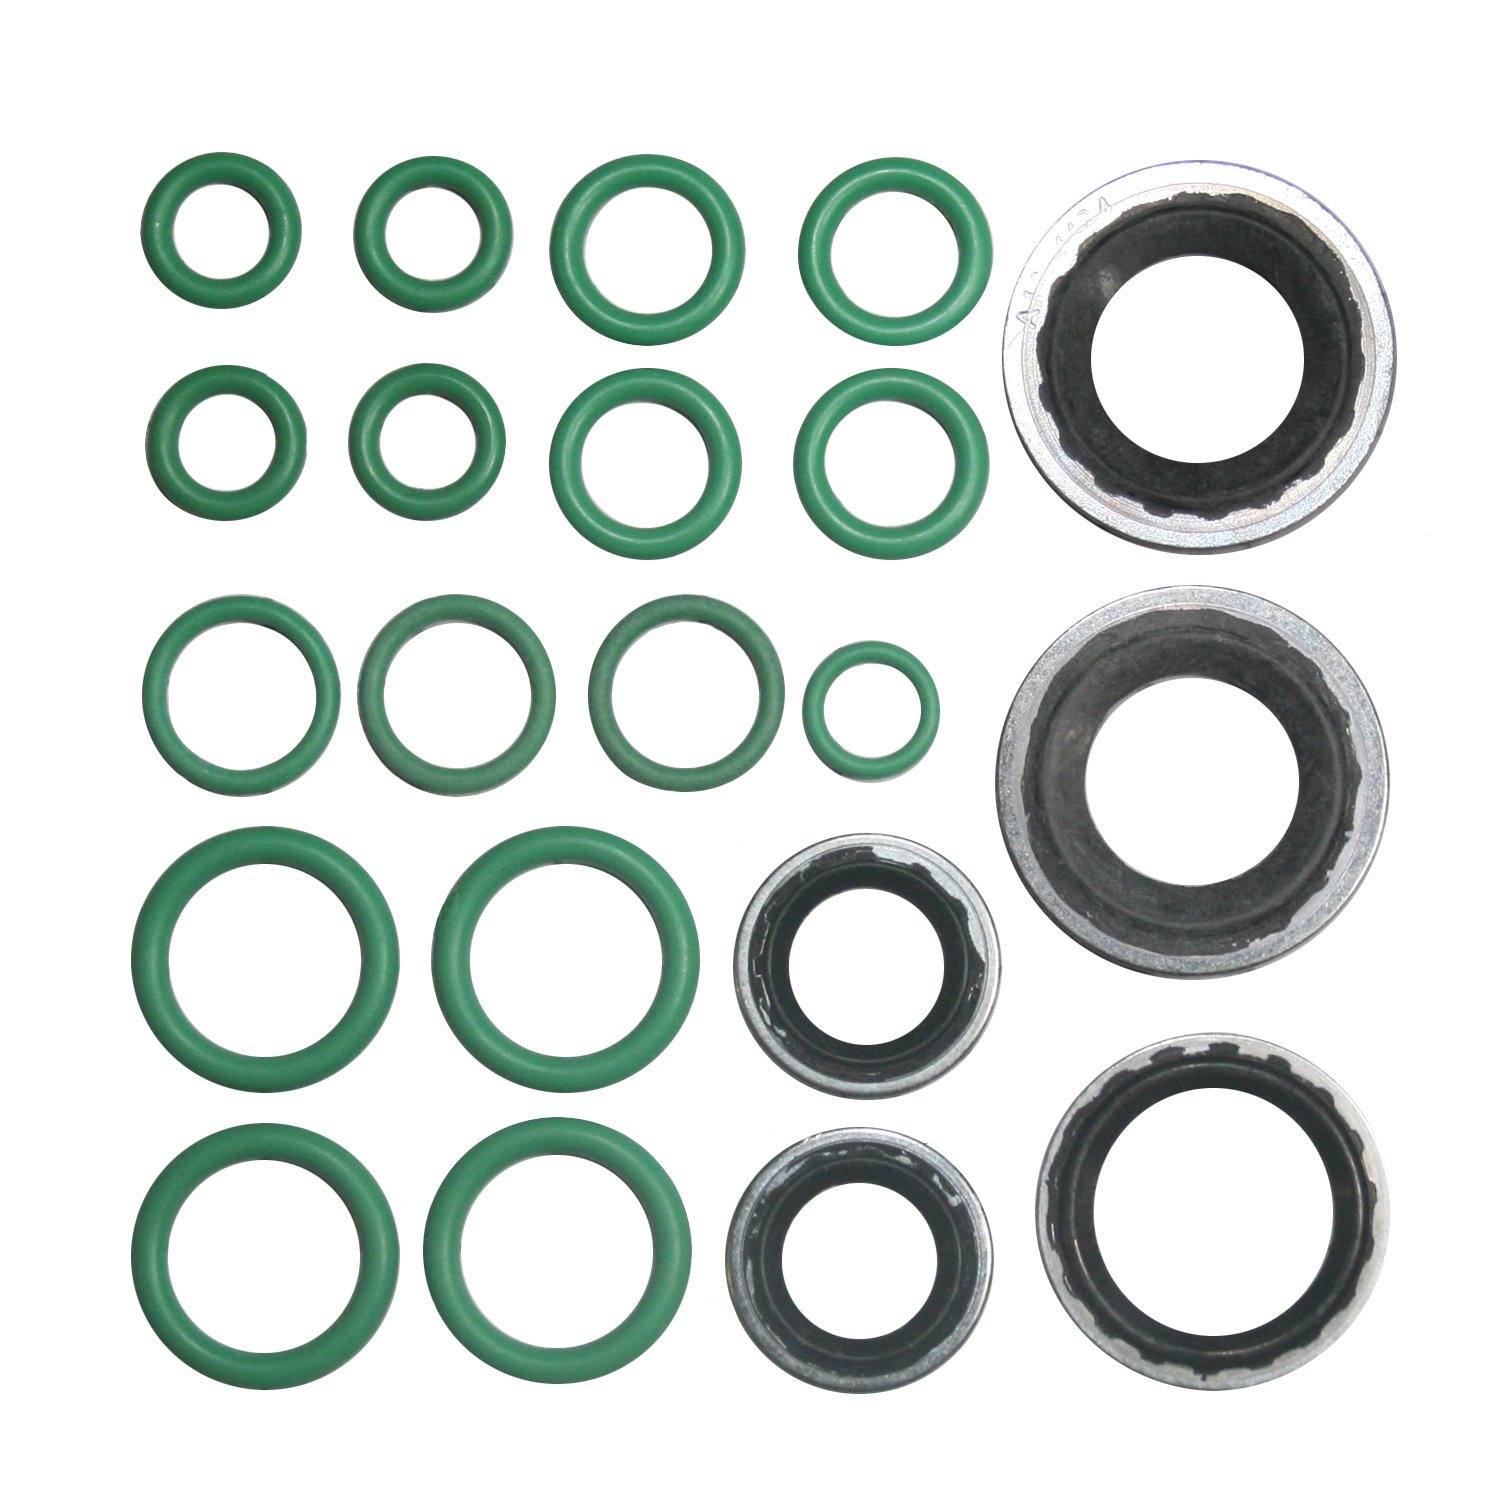 TCW O-Rings MT2552 New Product Image field_60b6a13a6e67c